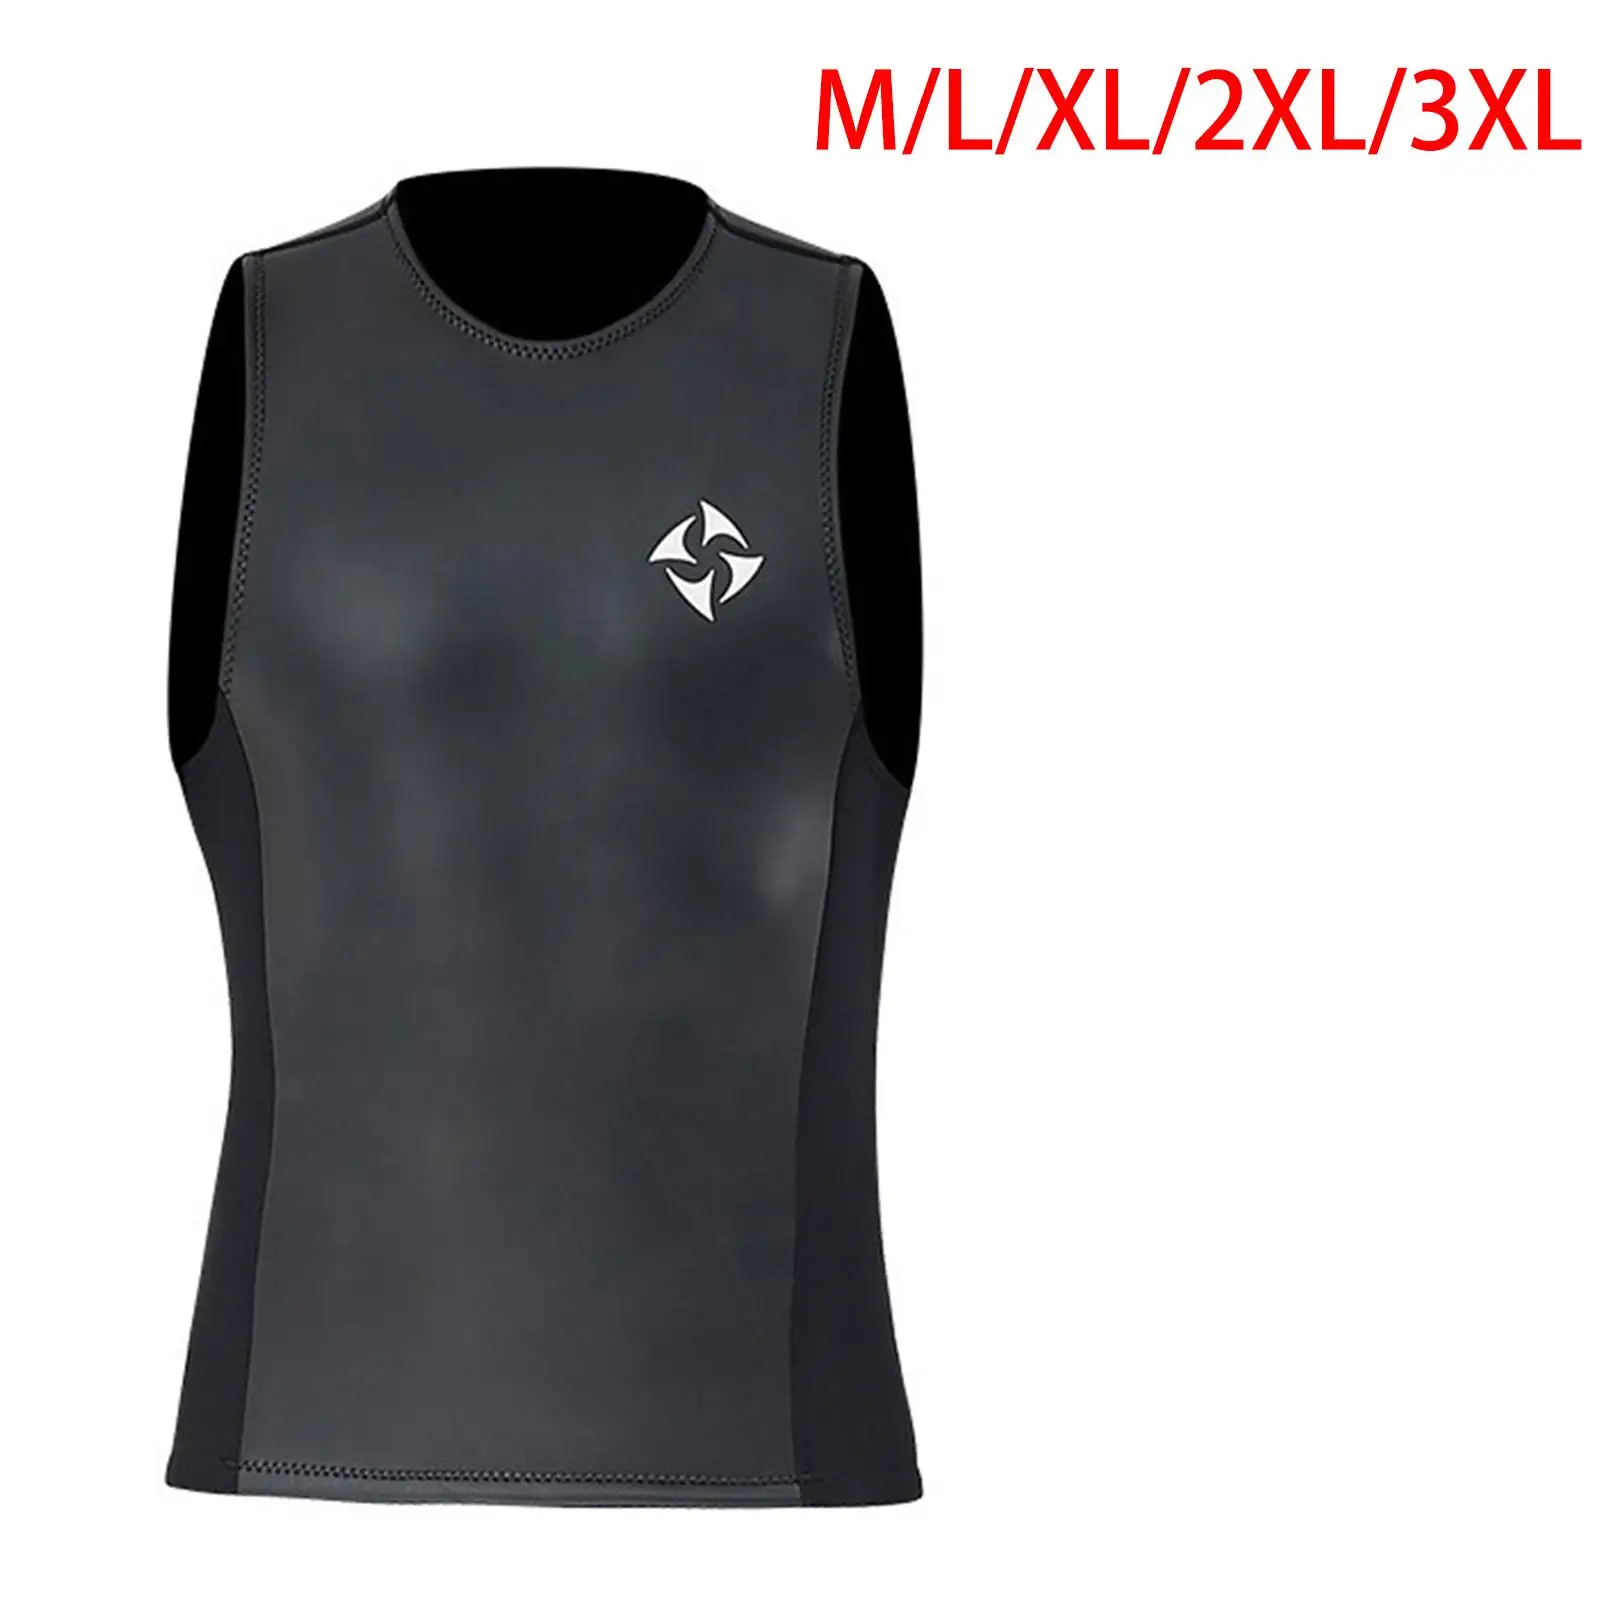 2MM Neoprene Wetsuit Vest Jacket Sleeveless Warm Wetsuits Top Mens for Cold Water Diving Surfing